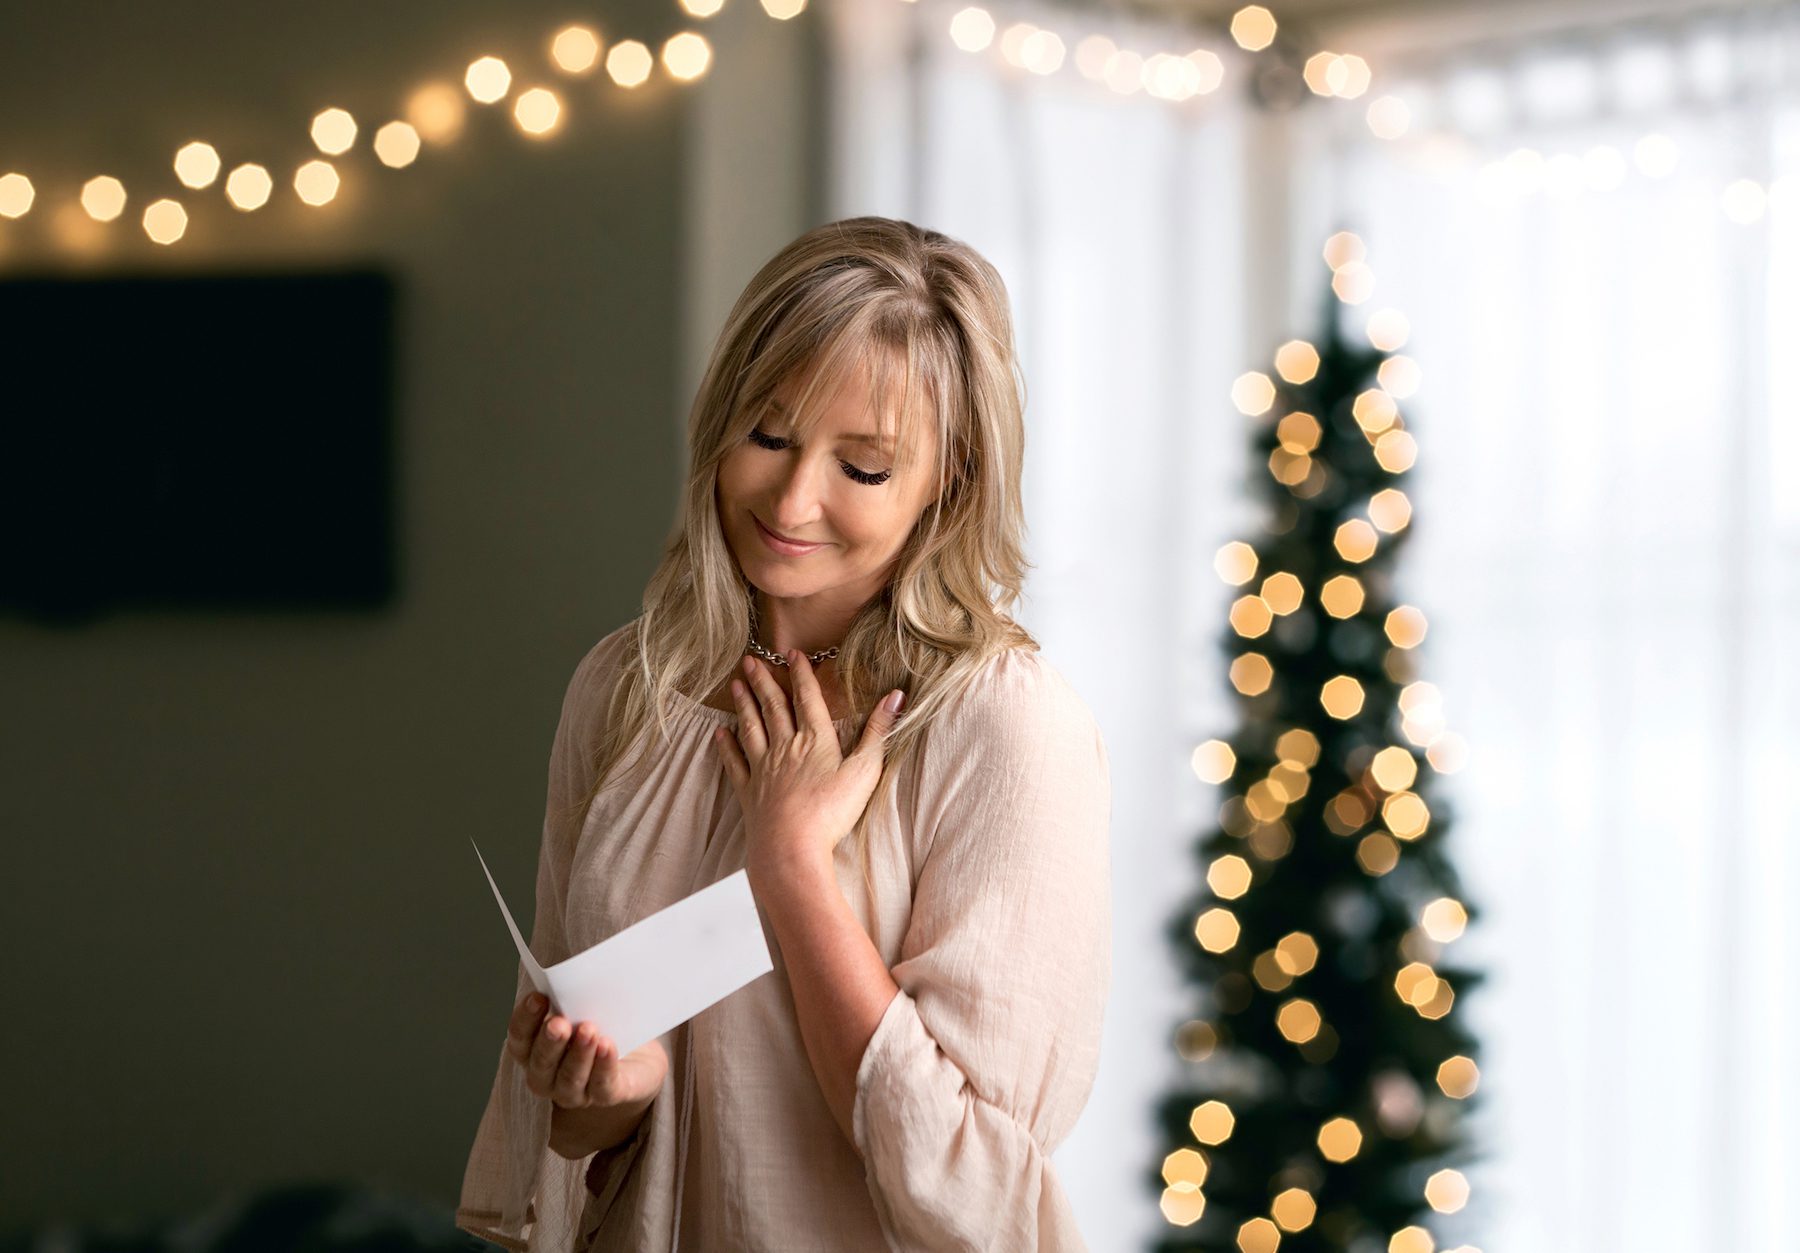 blonde woman with lashes reading heartfelt holiday card and gift